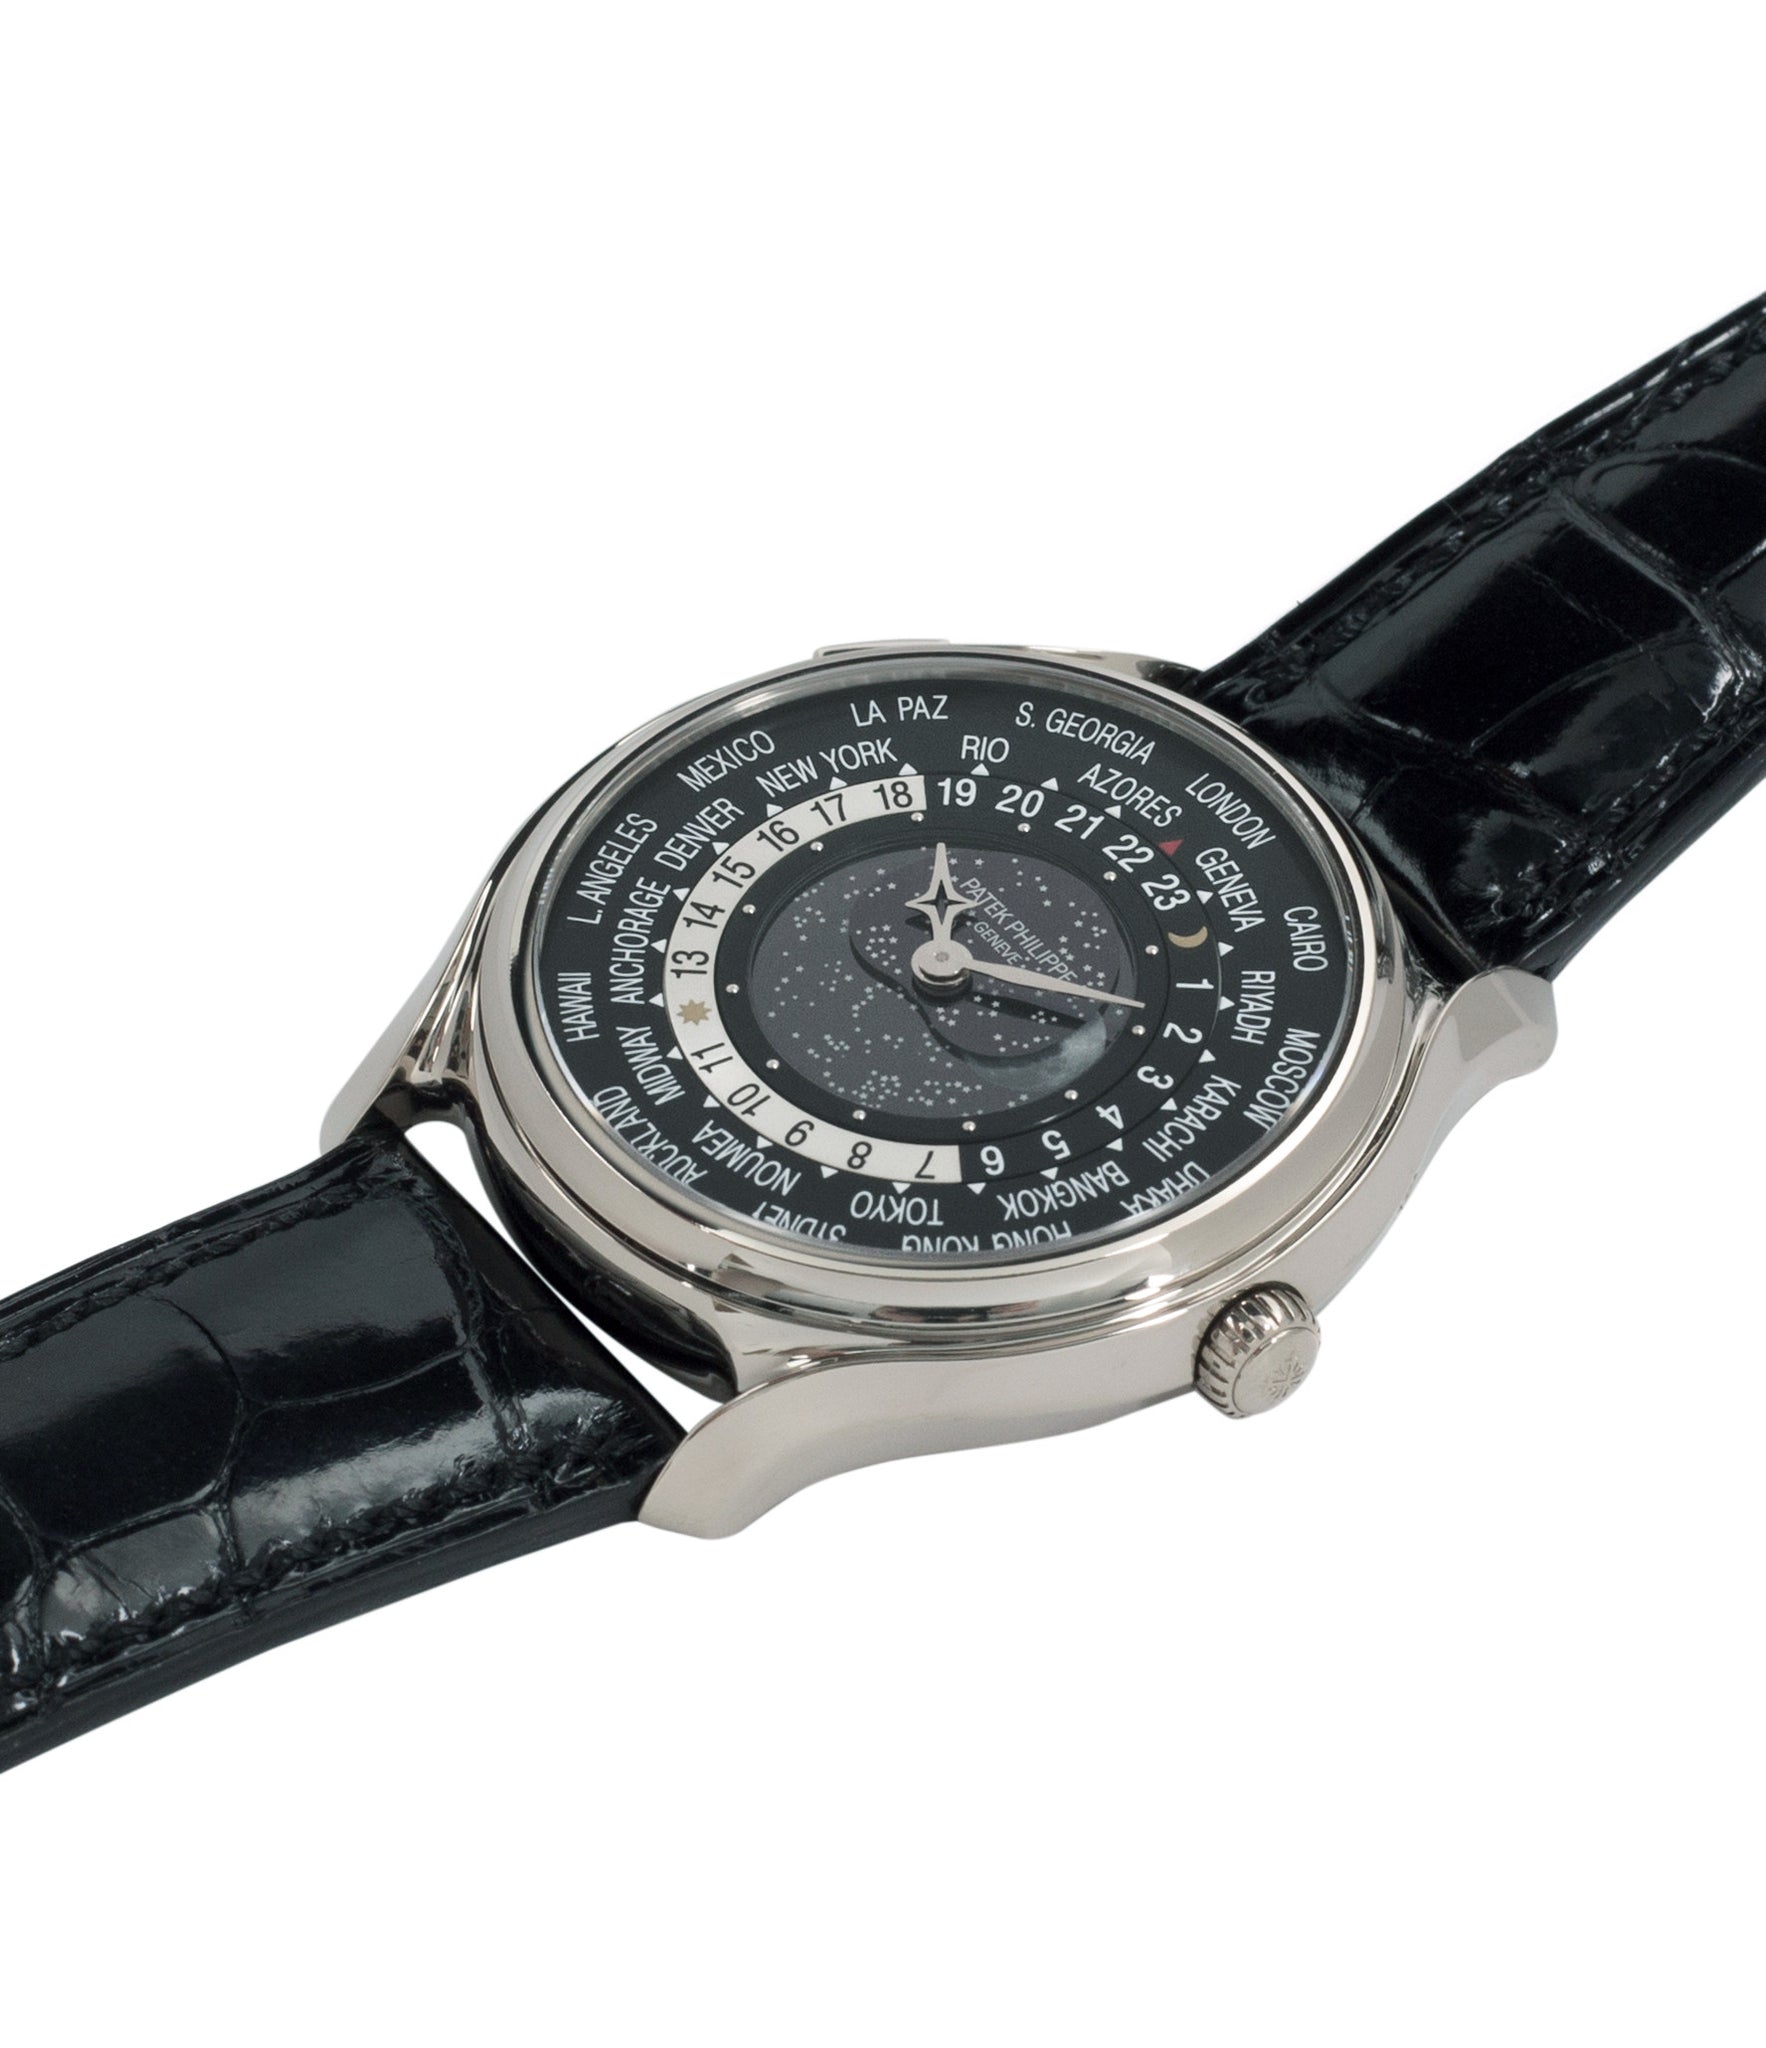 buy preowned Patek Philippe Worldtimer Moonphase 5575G 175th Anniversary white gold dress watch for sale online at A Collected Man London rare watch specialist